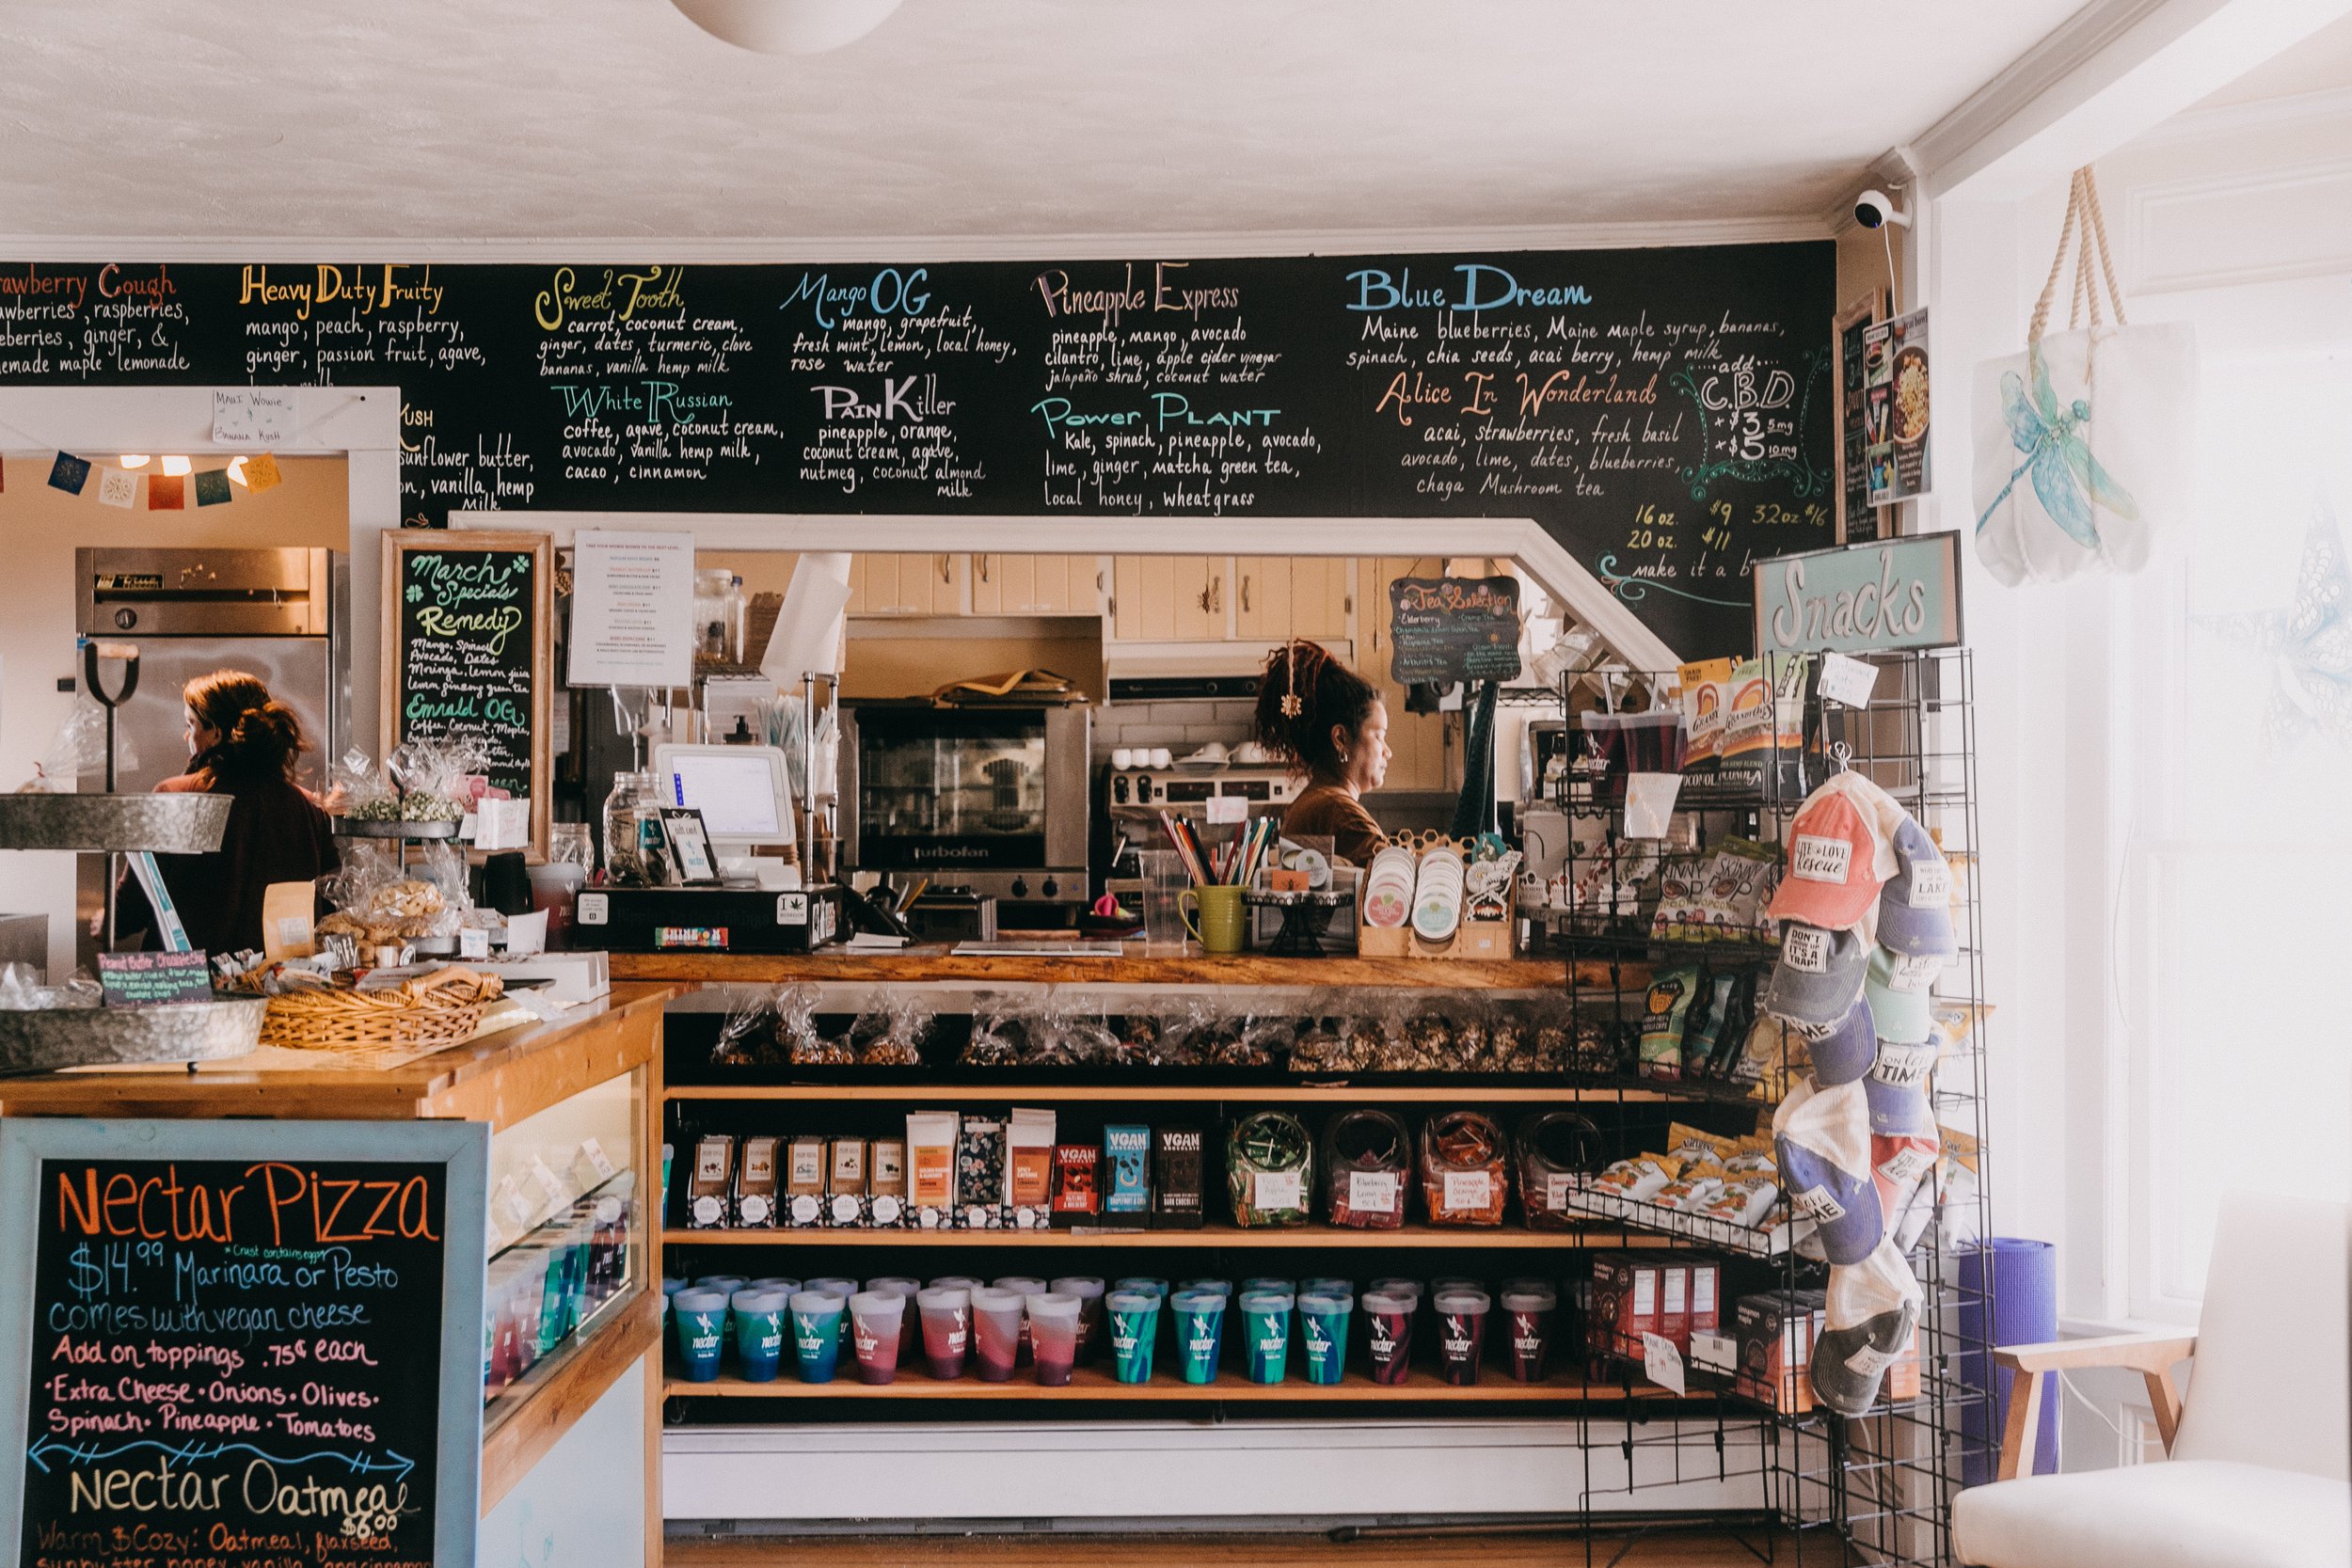 Located in Bridgton, Nectar serves plant-based and gluten free smoothies, CBD products, herbal remedies and locally made gifts.